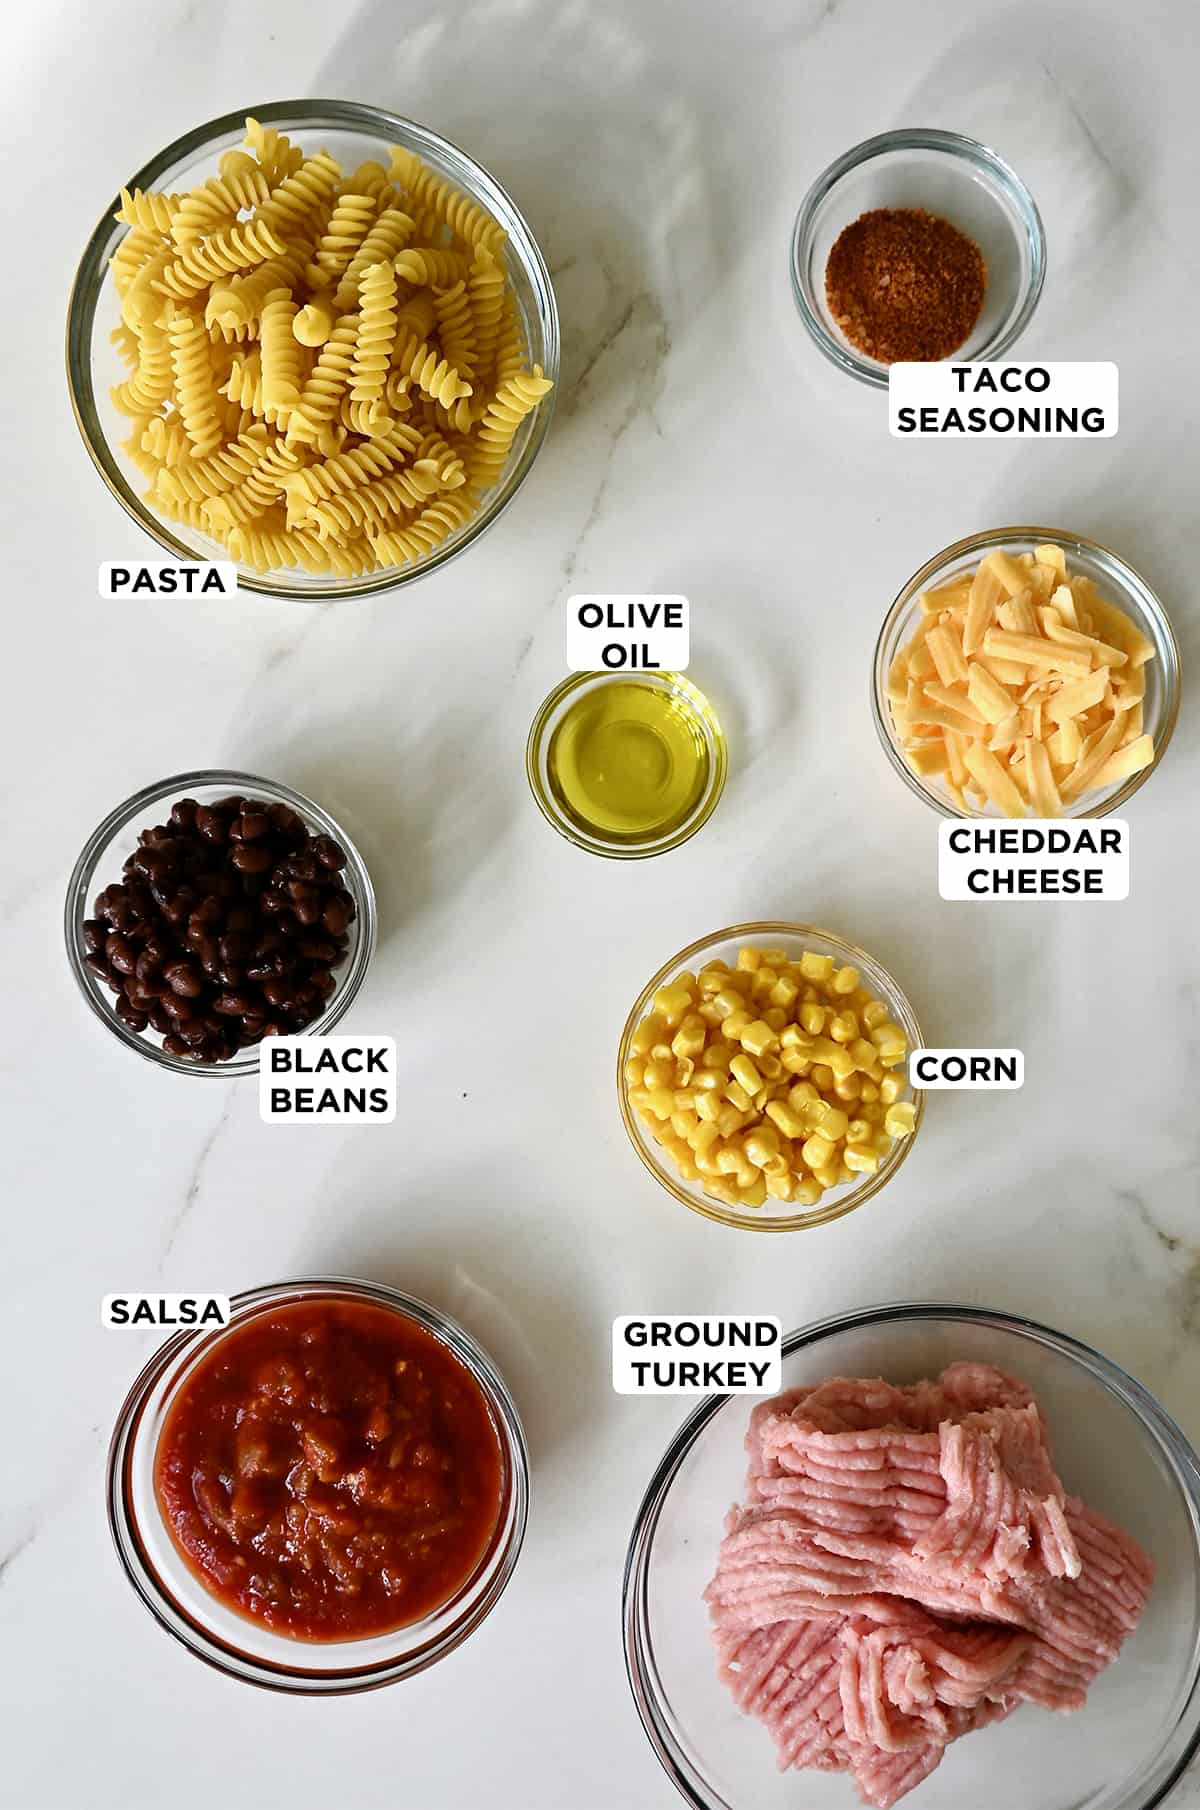 Glass bowls containing the ingredients for turkey taco pasta, including rotini pasta, taco seasoning, shredded cheddar cheese, corn, olive oil, ground turkey, black beans and salsa.